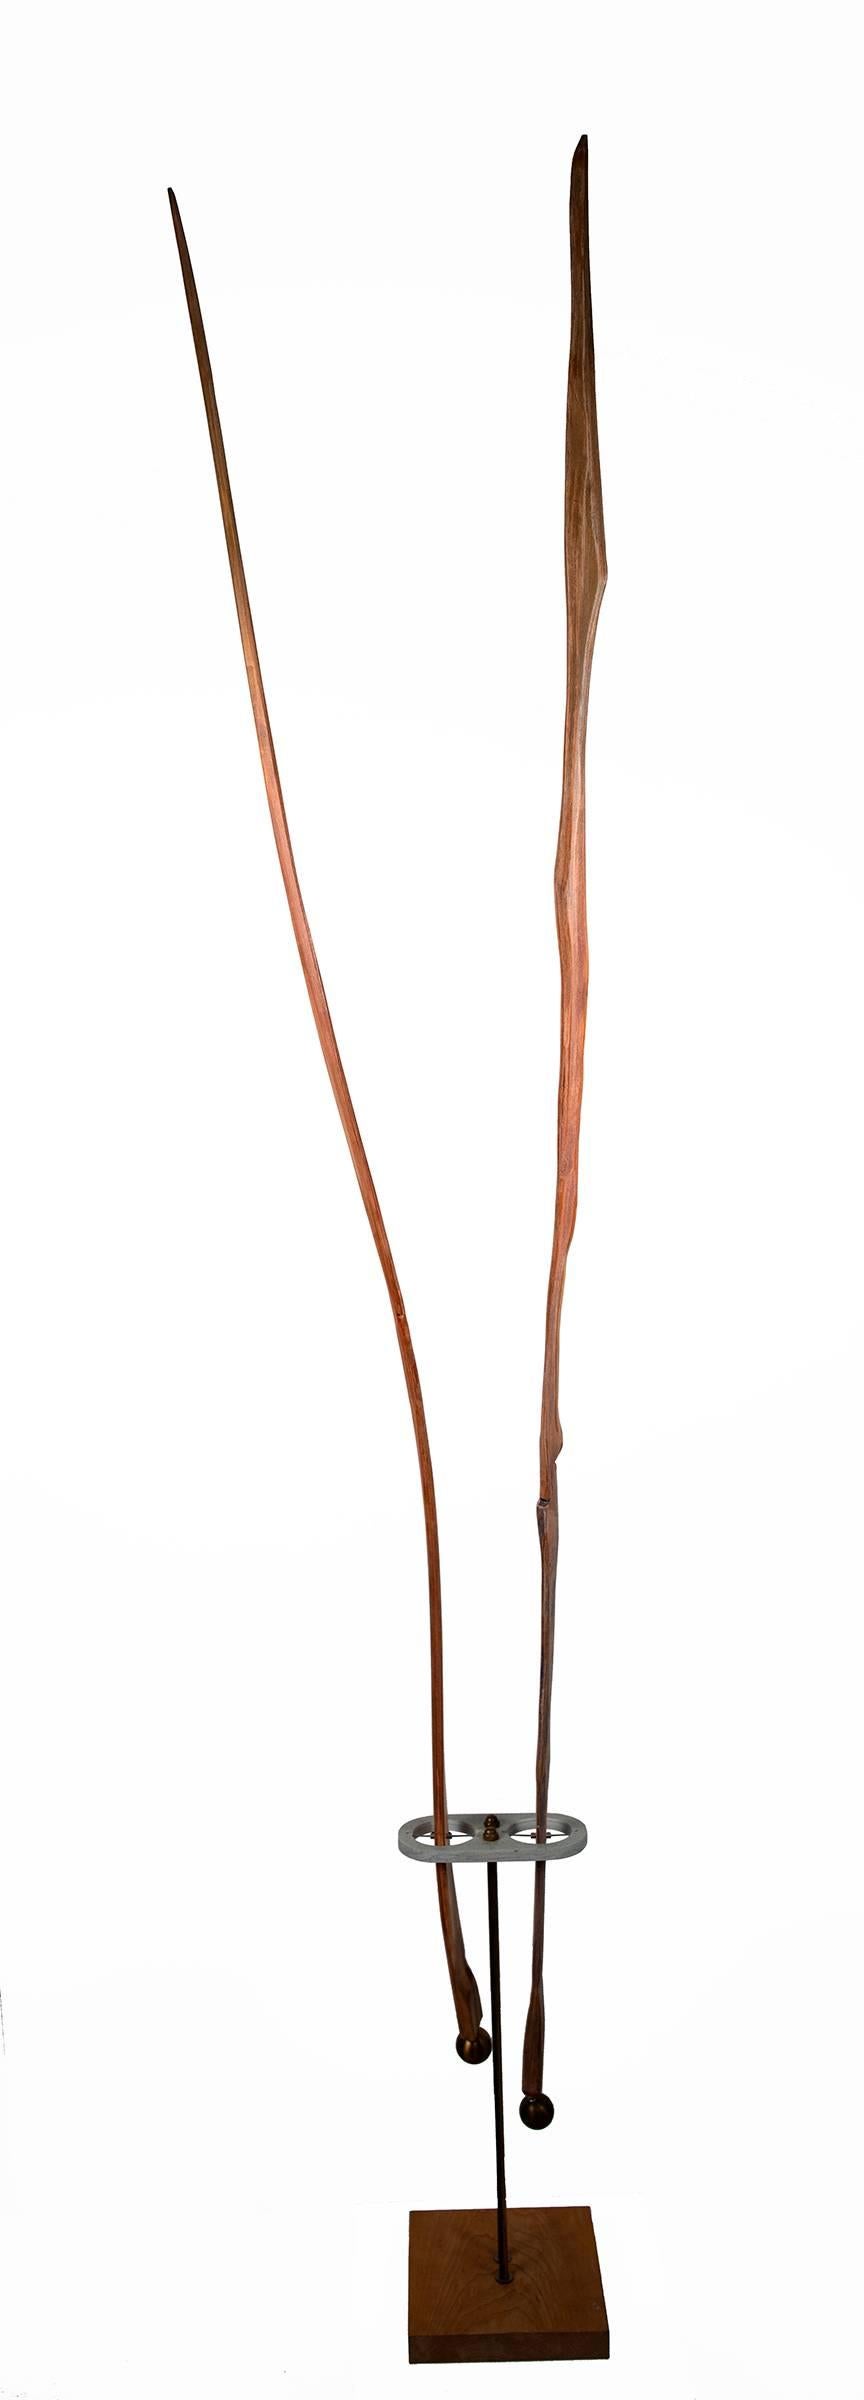 Two Lines Vertical - Brown Figurative Sculpture by David Smalley